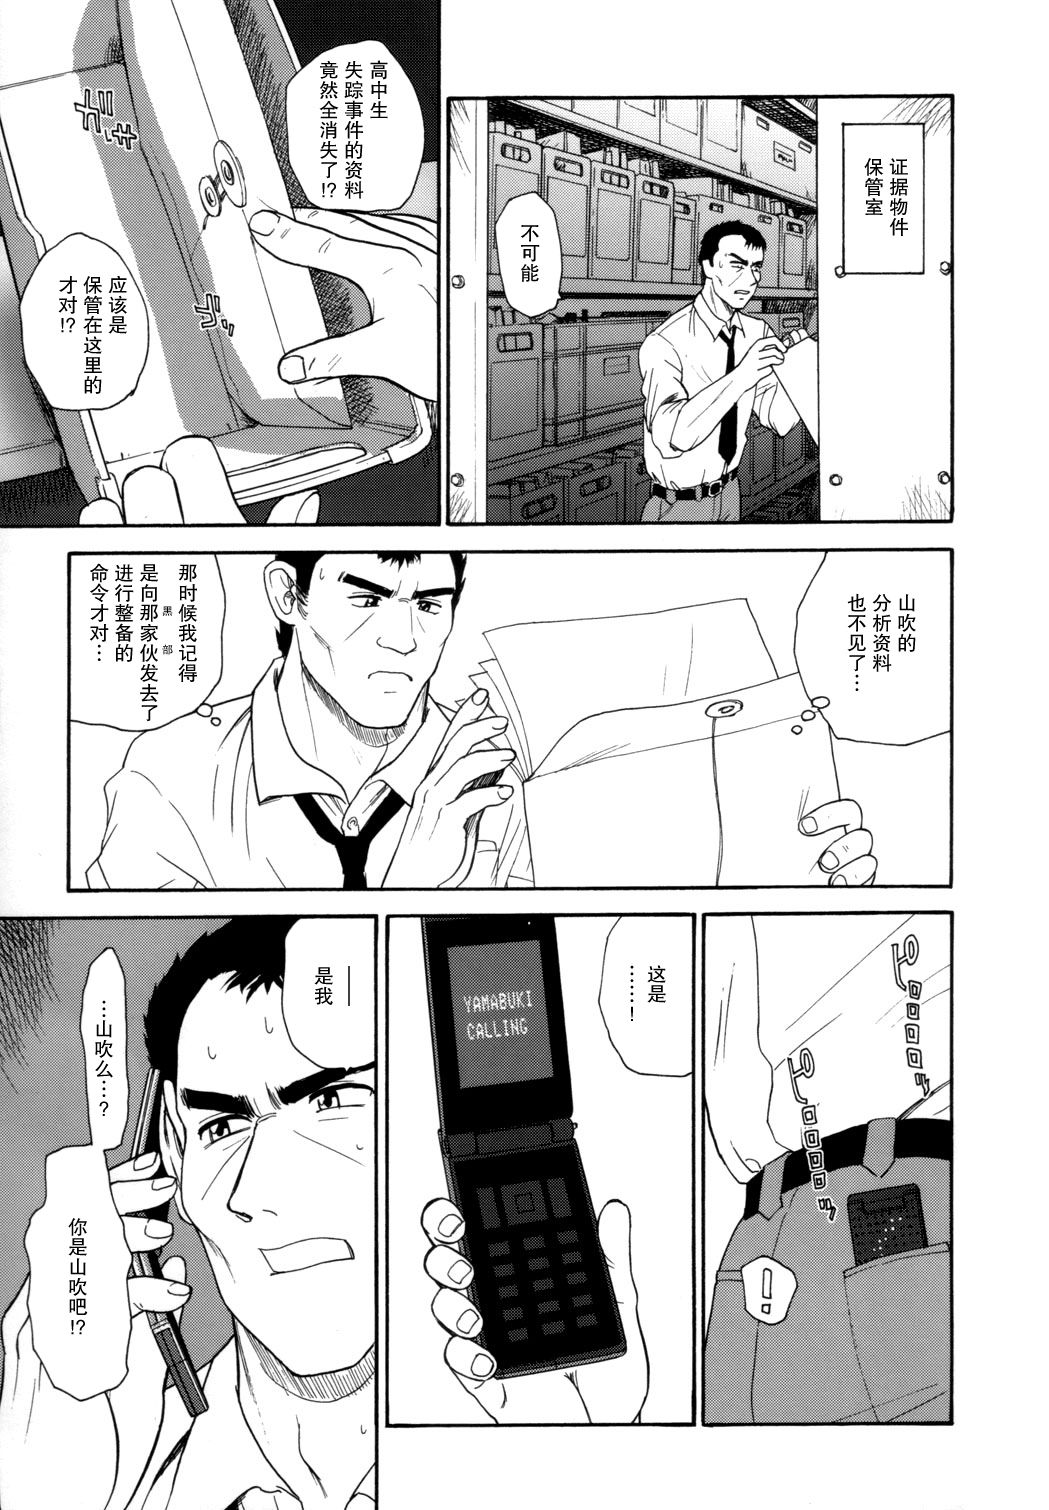 (C72) [Behind Moon (Q)] Dulce Report 9 | 达西报告 9 [Chinese] [哈尼喵汉化组] [Decensored] page 37 full